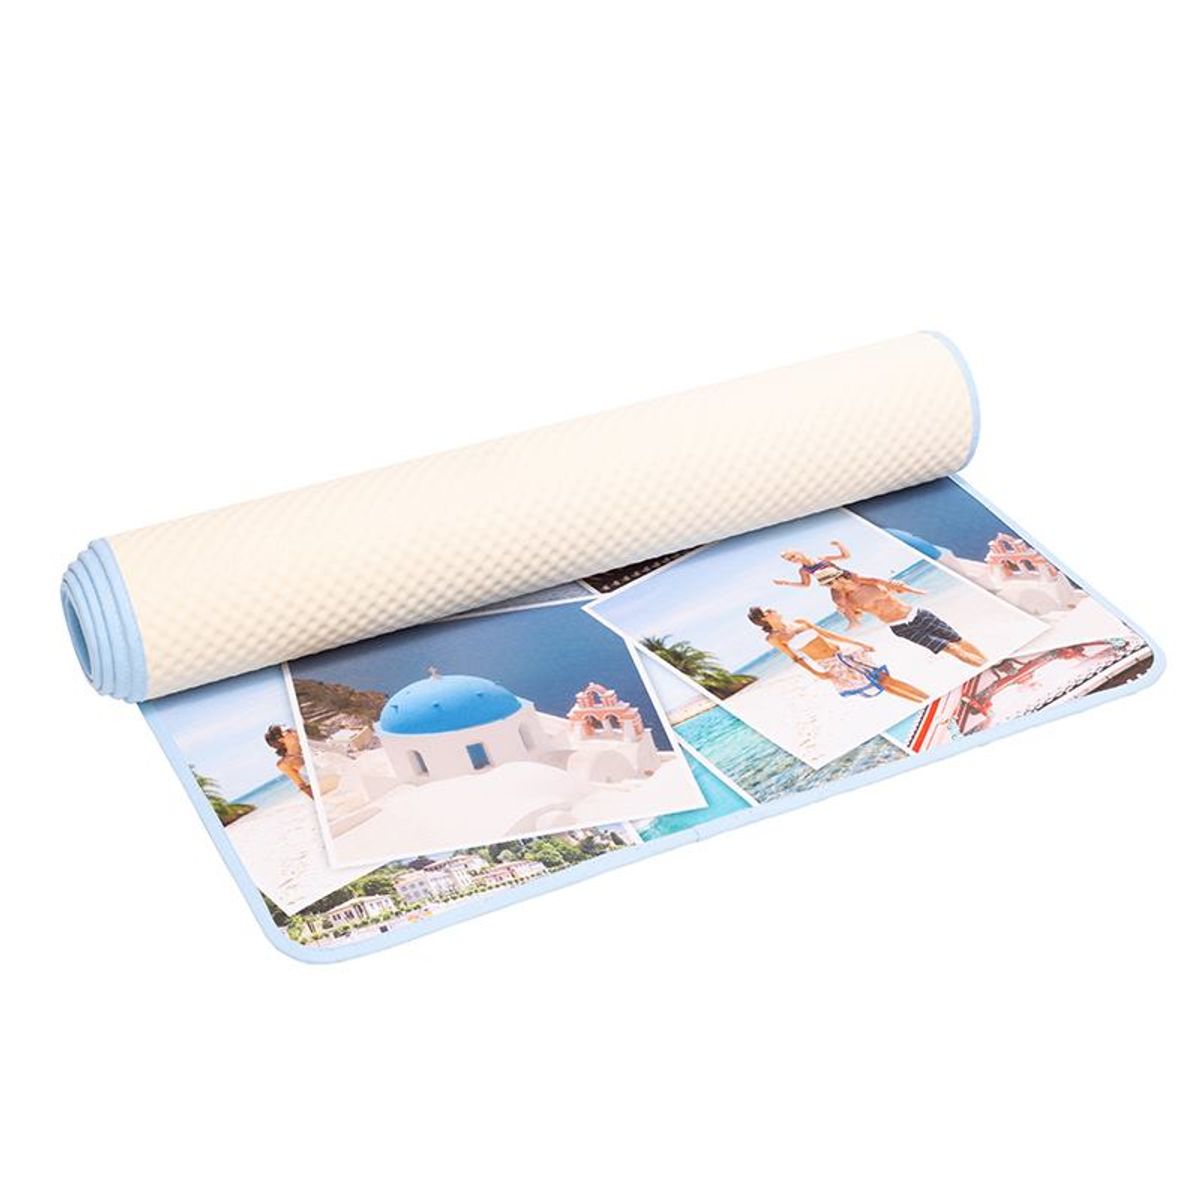 Yoga Mats - Your Home Decor Store